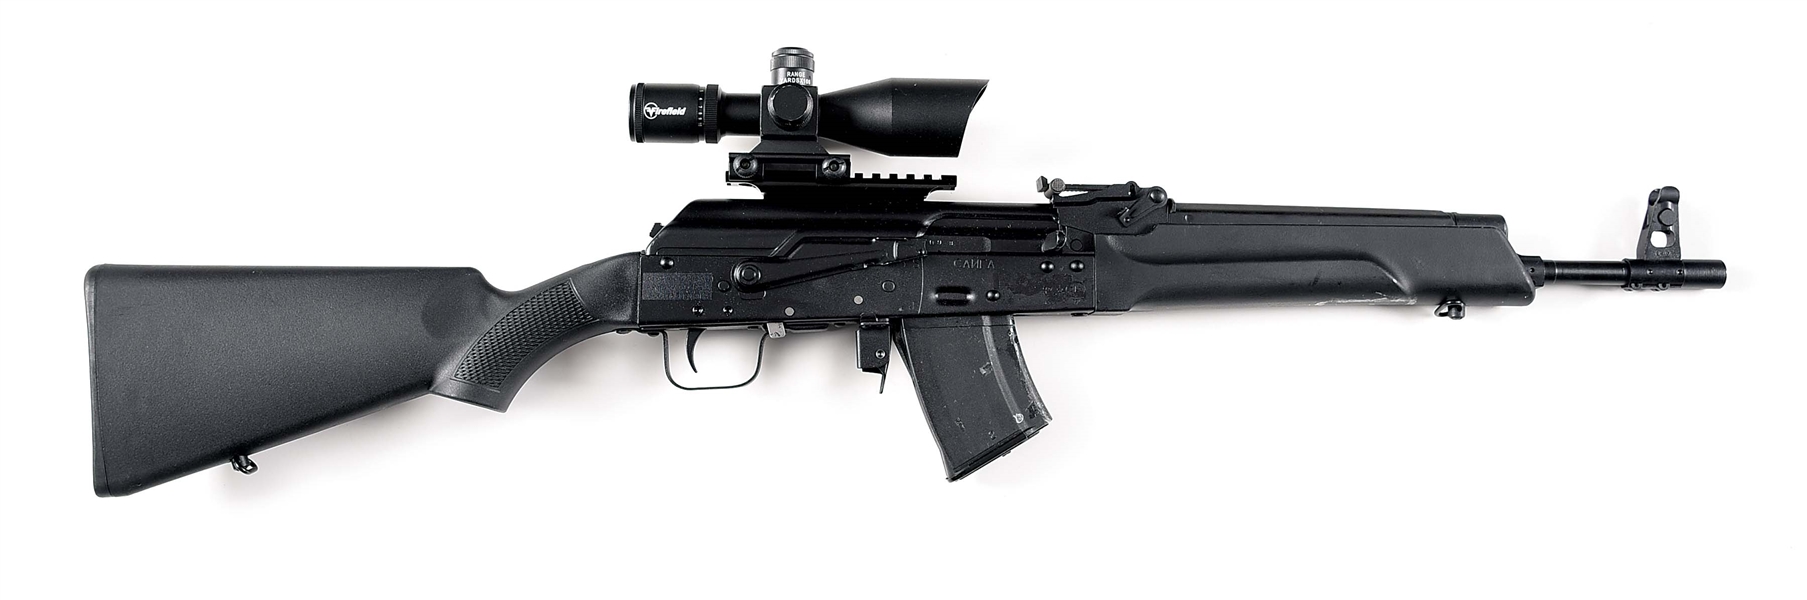 Saiga Semi Automatic Rifle Manufactured By Izhmash For Commercial Sales